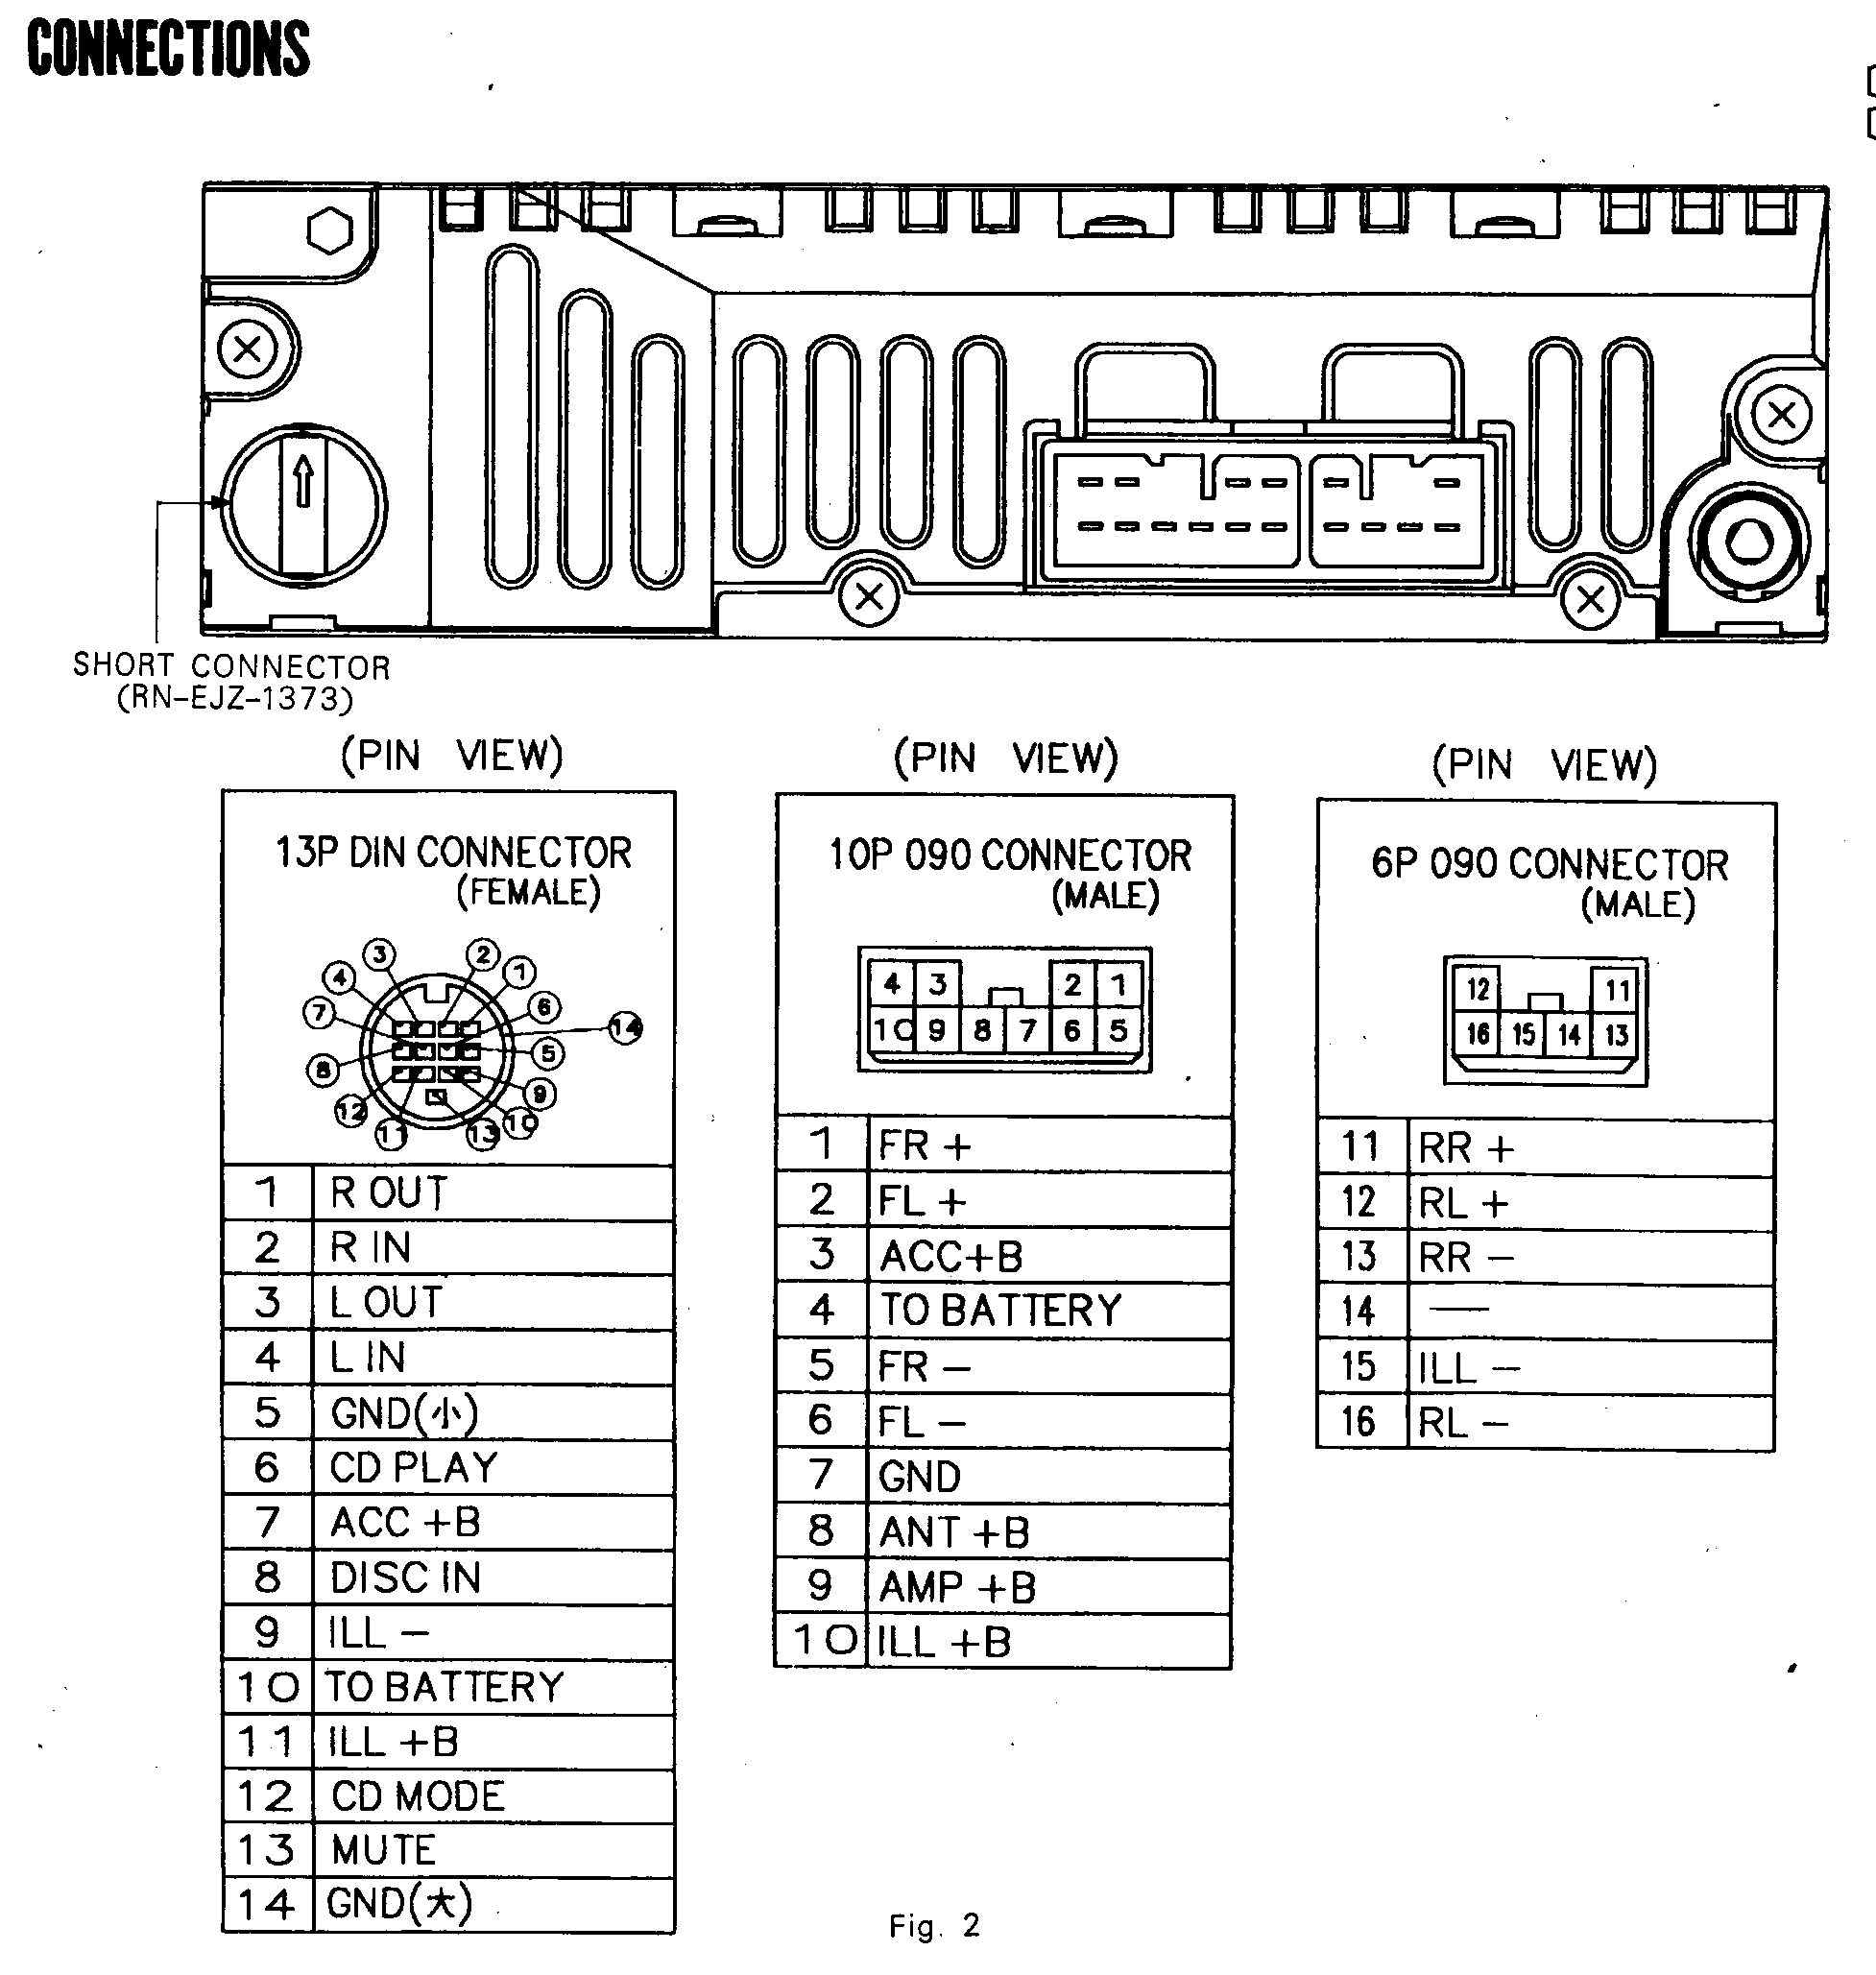 Typical Wiring Diagram Sony Car Stereo from www.carstereohelp.net